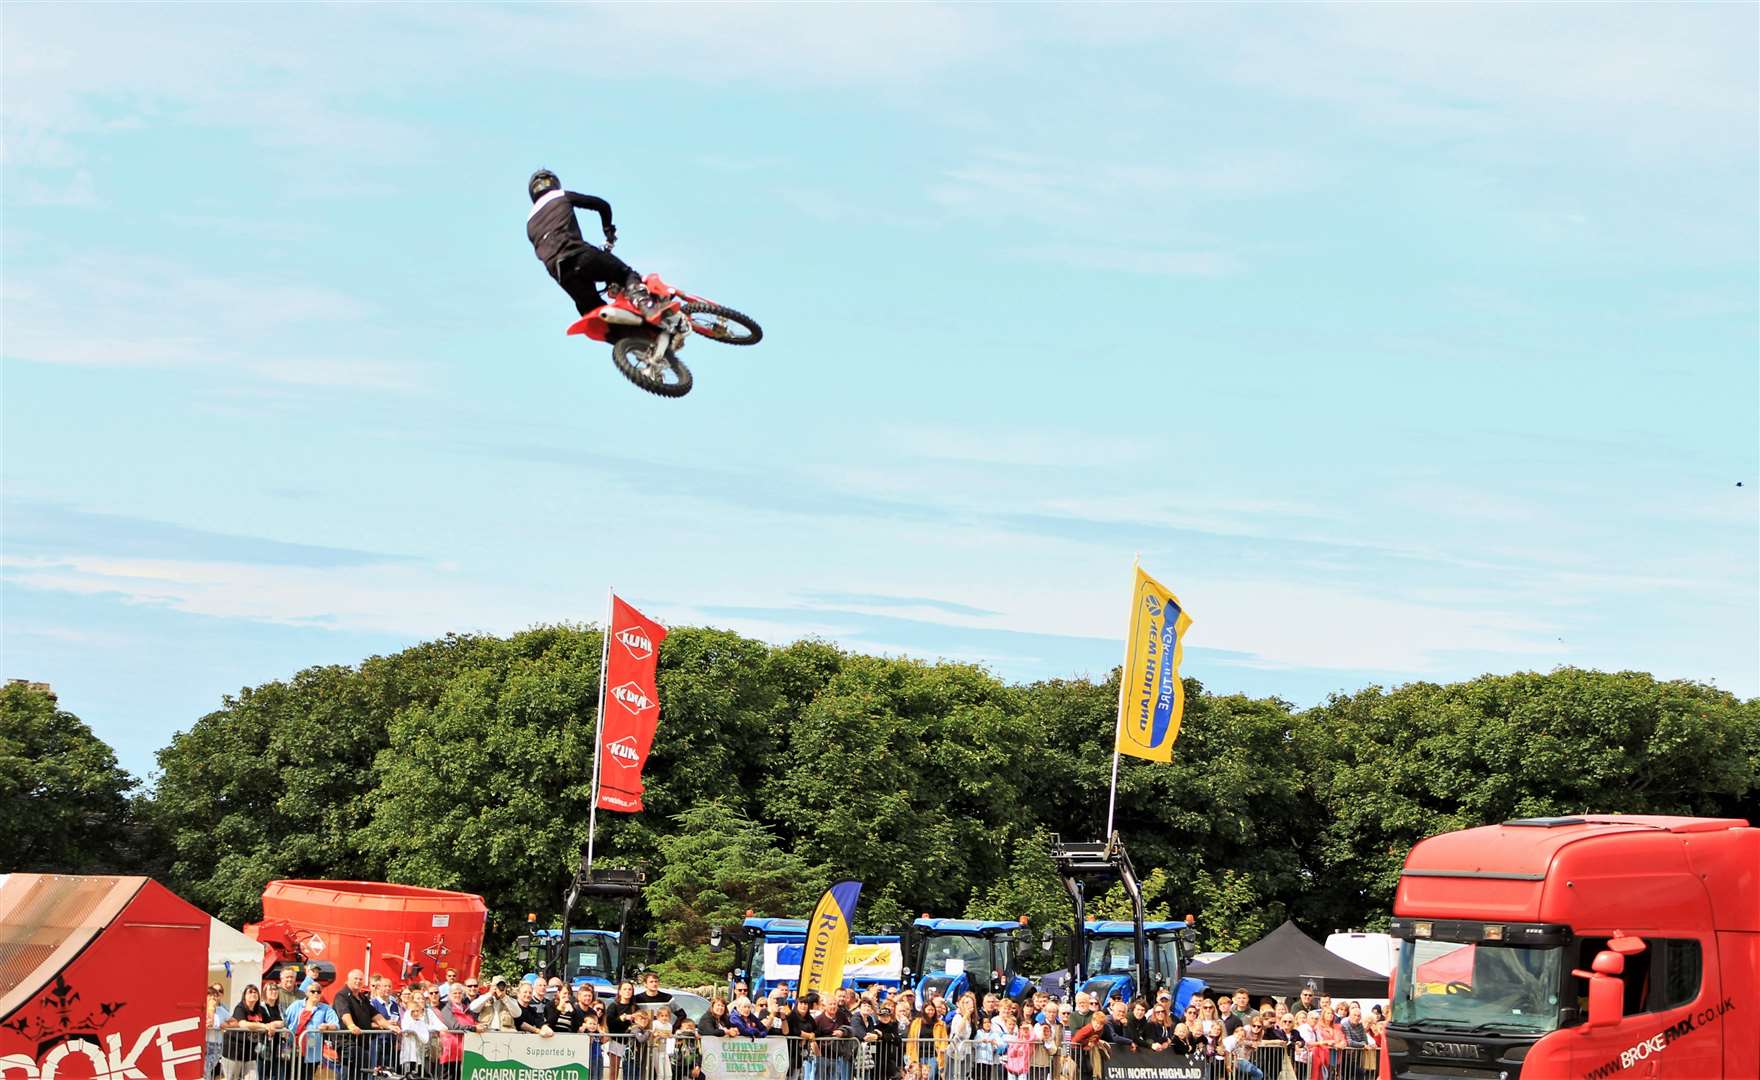 The Broke FMX rider flies close to 40ft in the air. Picture: Alan Hendry